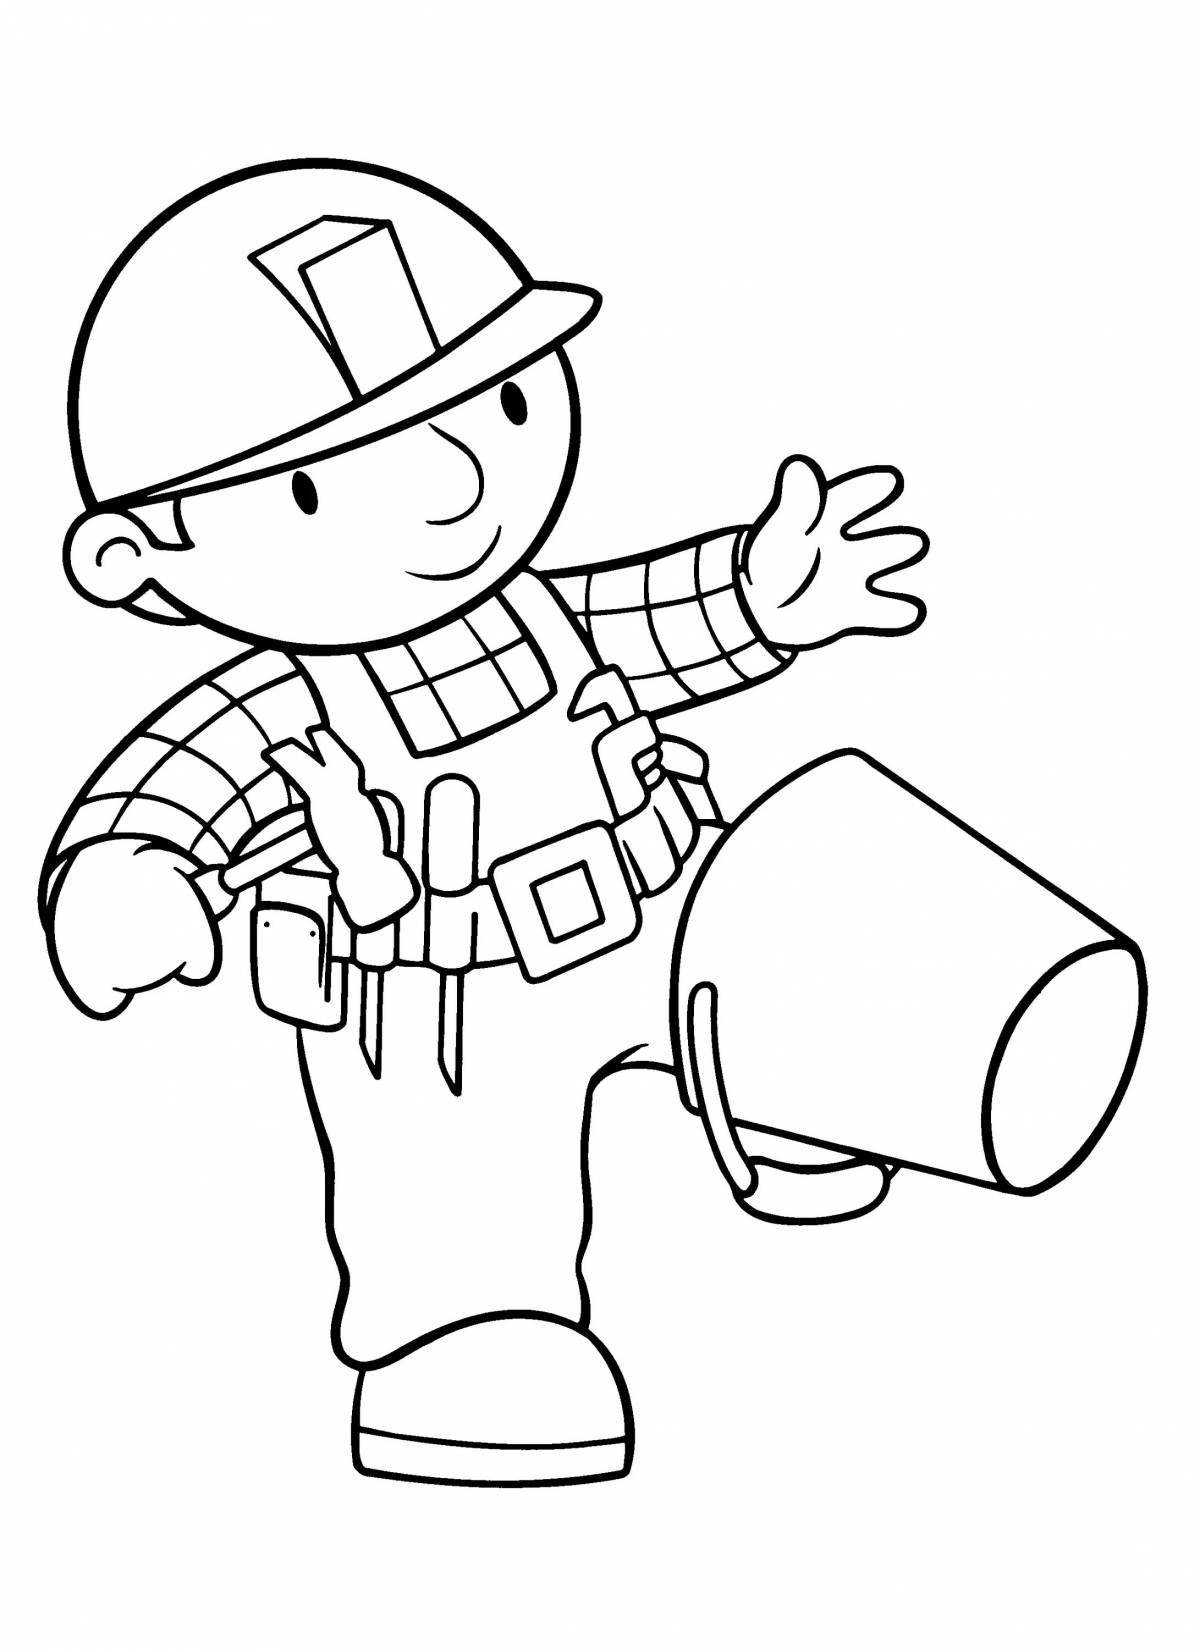 Construction professions coloring page